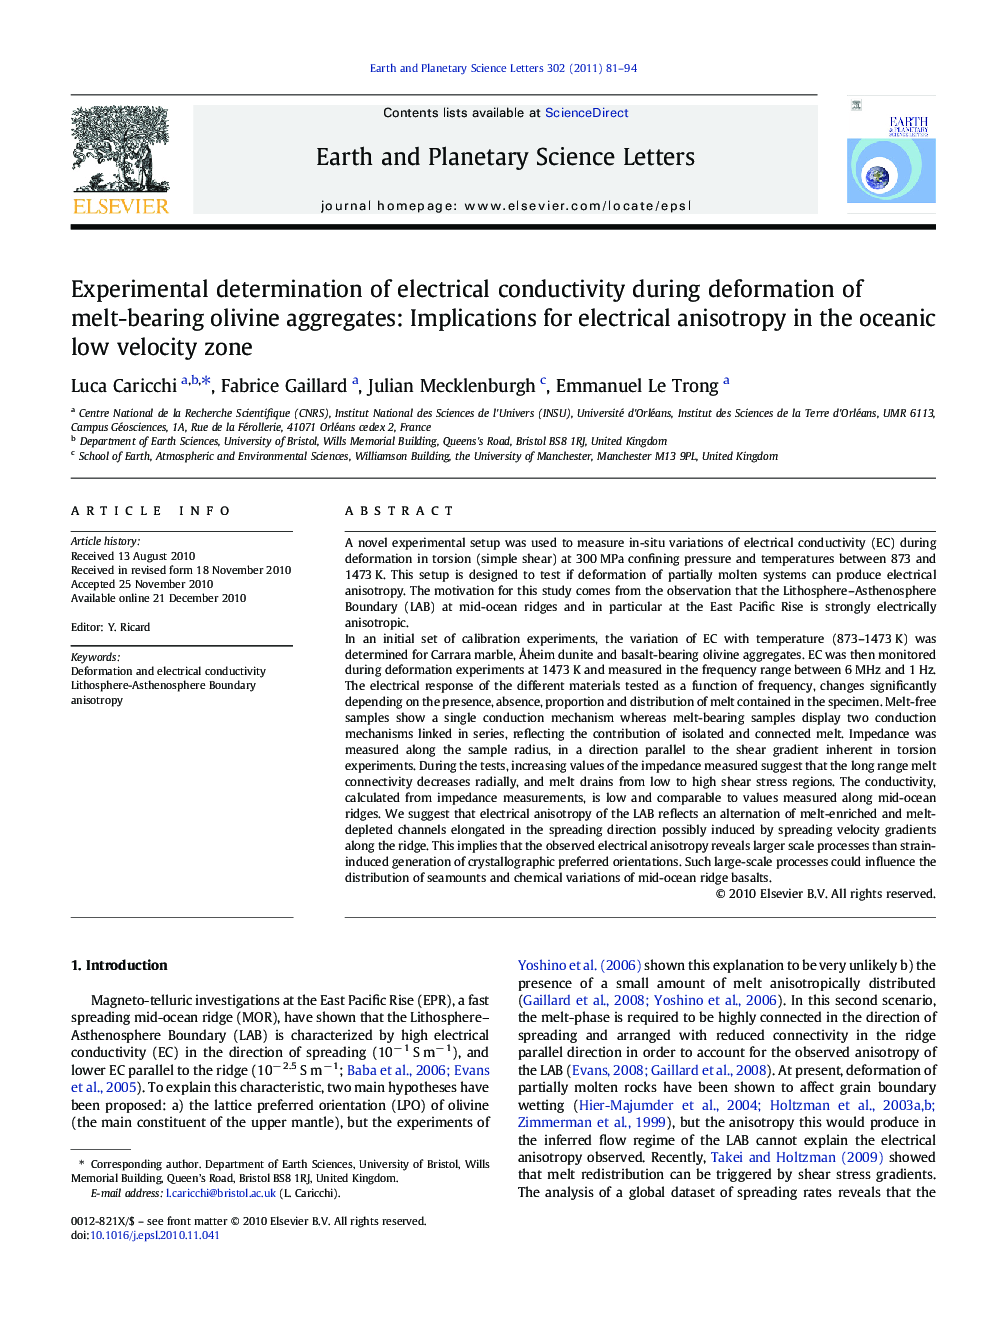 Experimental determination of electrical conductivity during deformation of melt-bearing olivine aggregates: Implications for electrical anisotropy in the oceanic low velocity zone